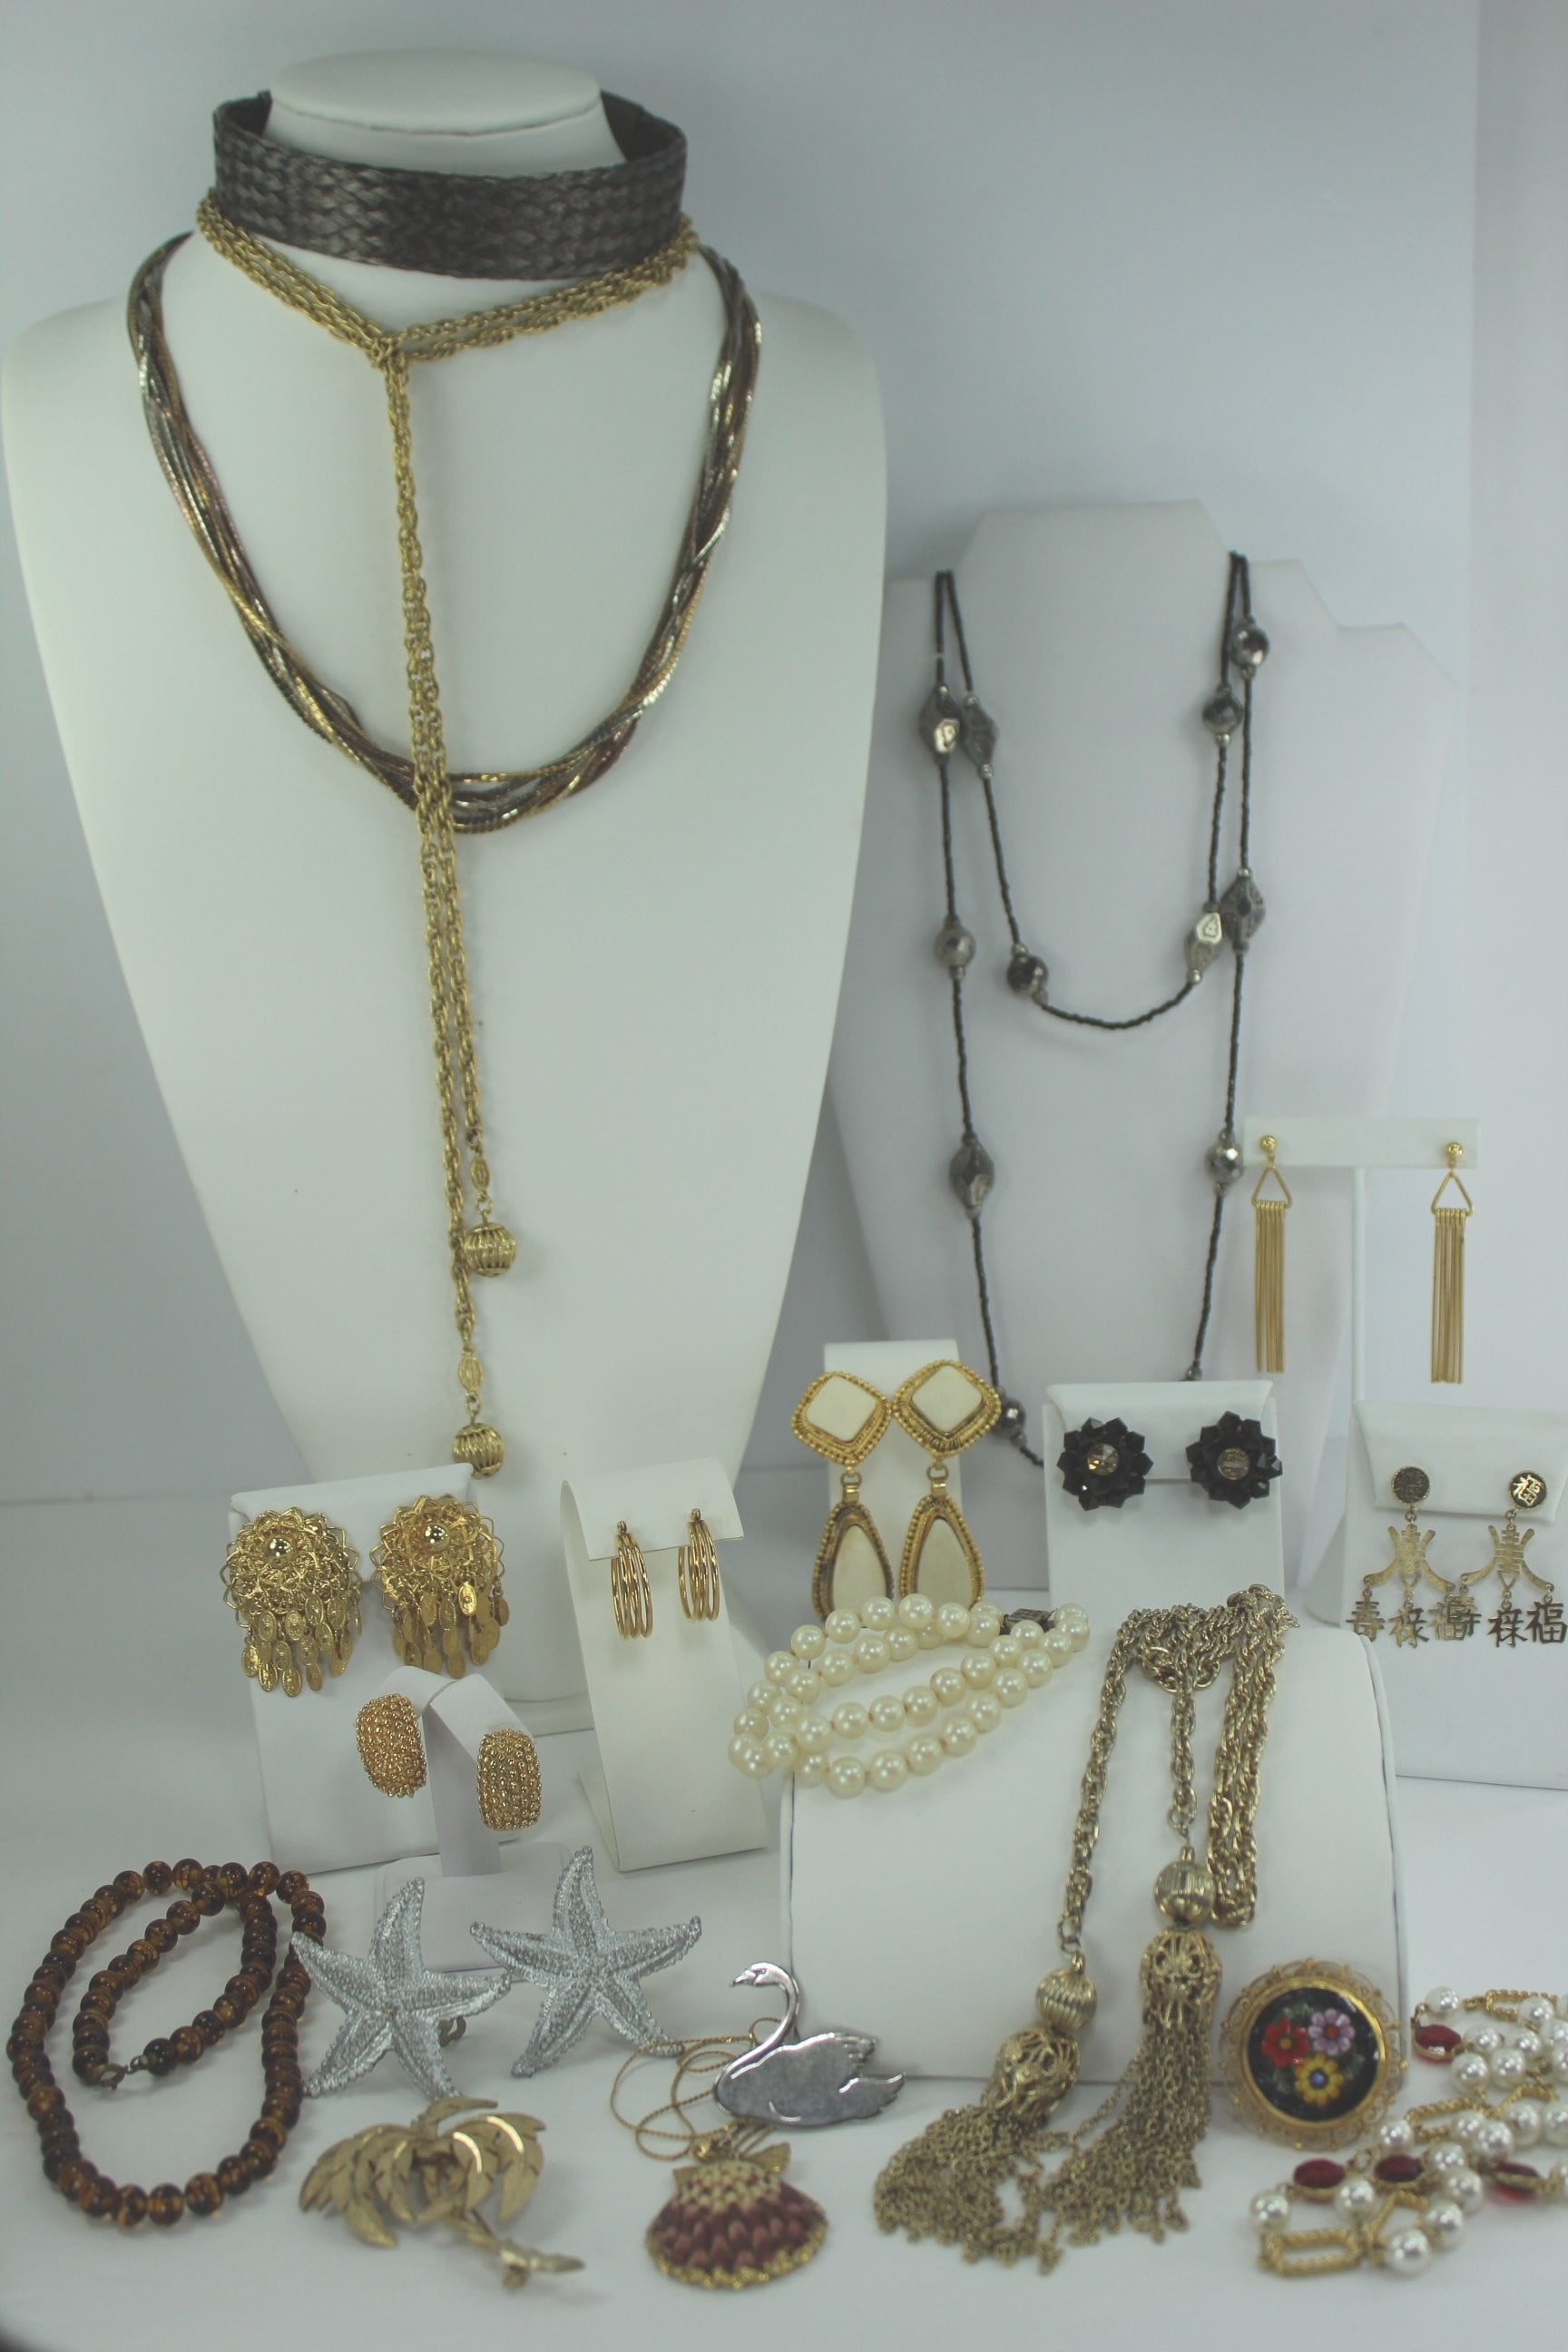 Exceptional Jewelry Lot 20 Pieces Unmarked Good Variety Earrings Necklaces Pins